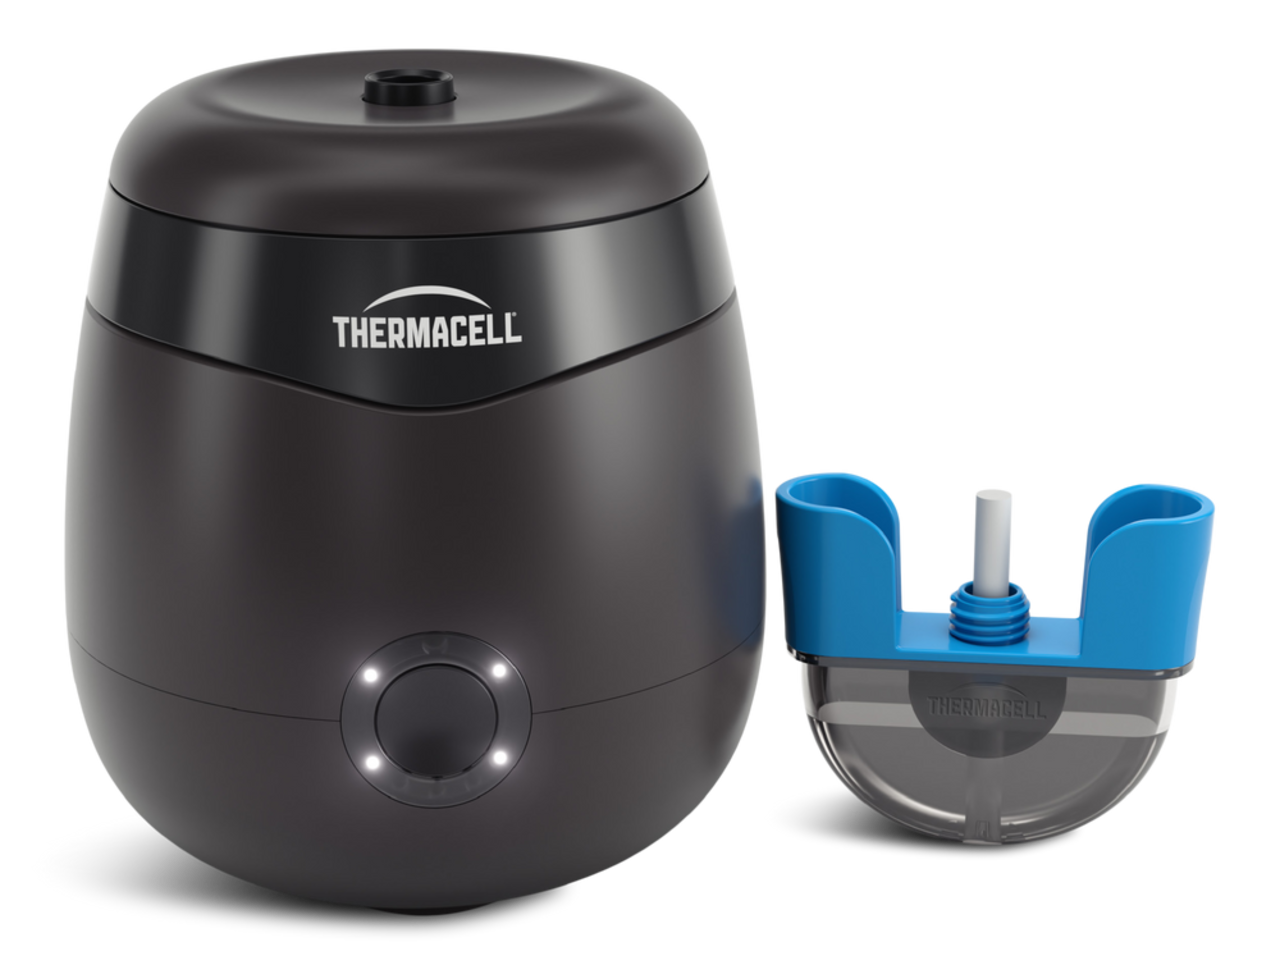 Thermacell Mosquito Repellent, Rechargeable E-Series E55, Charcoal